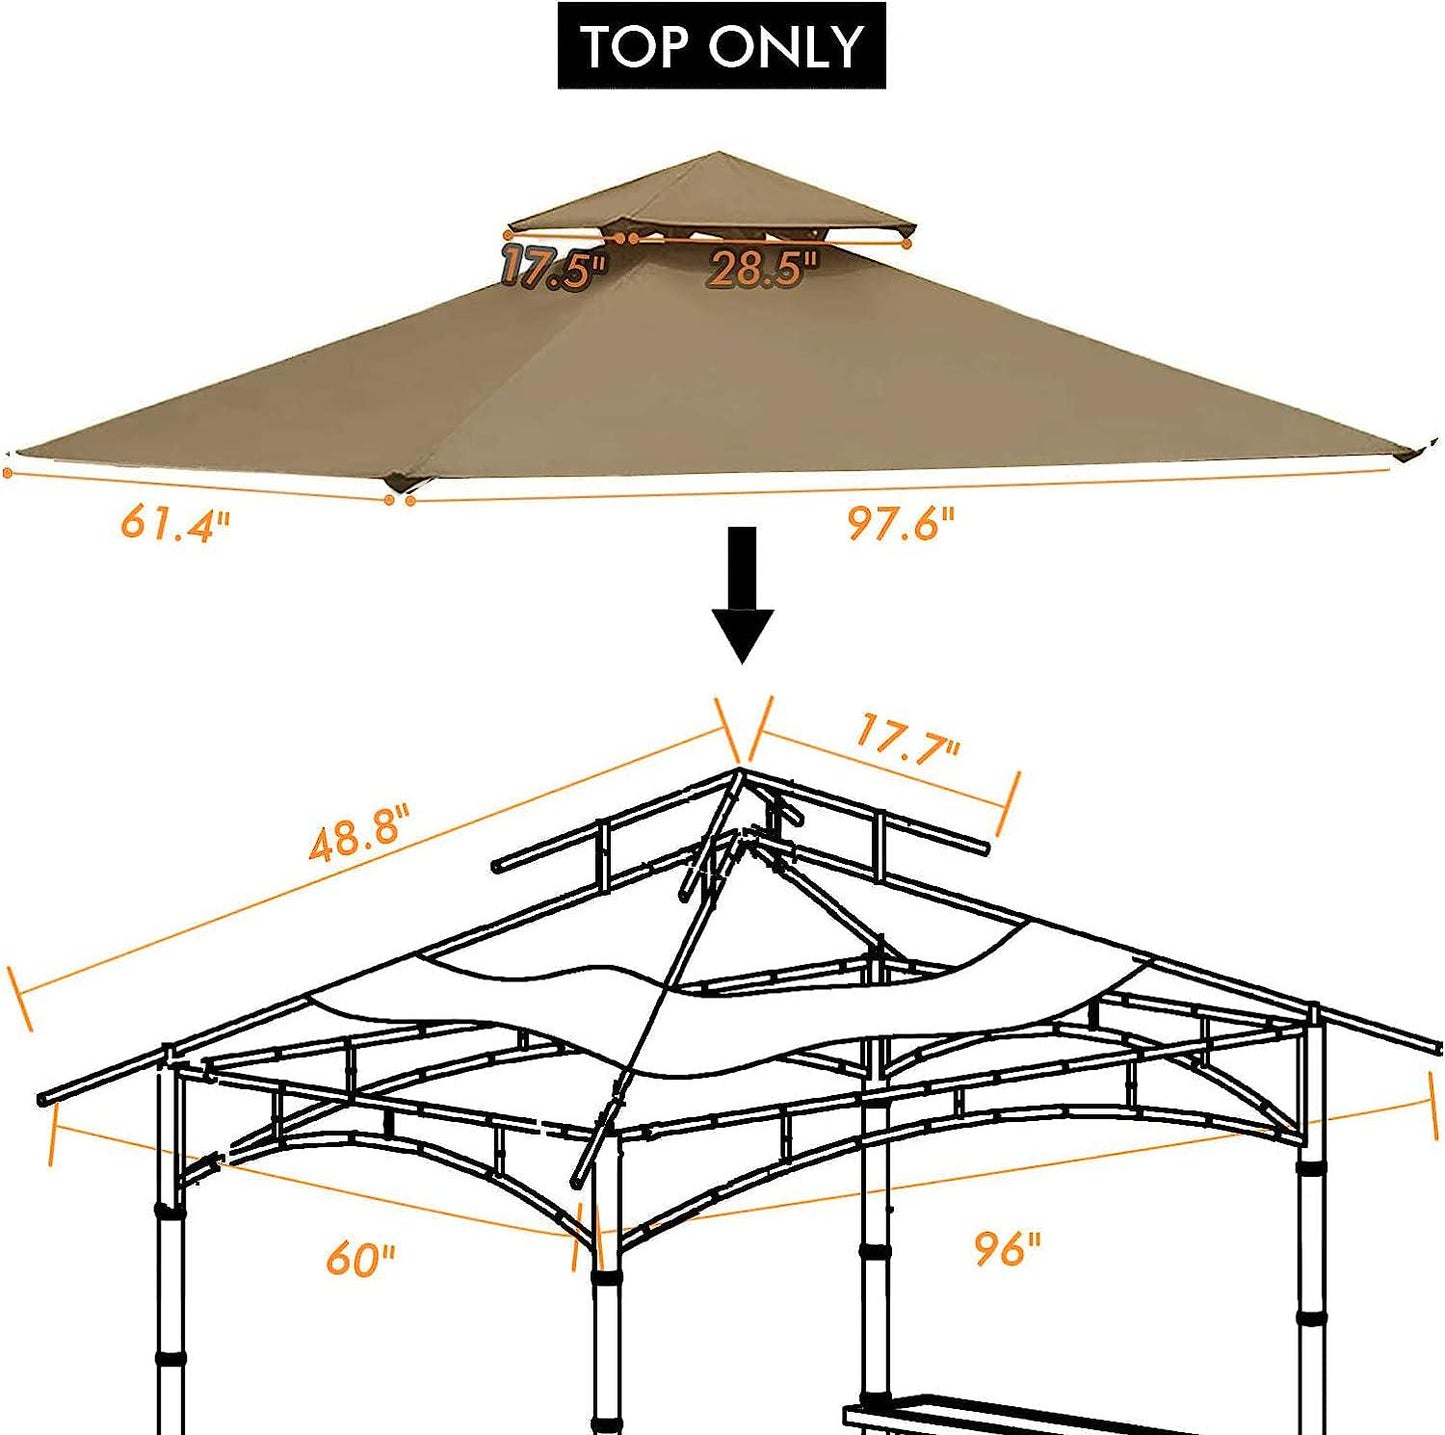 Tanxianzhe 5FT x 8FT Grill Gazebo Shelter Replacement Canopy Cover Double Tiered BBQ Roof Top ONLY FIT for Gazebo Model L-GG001PST-F (Khaki)